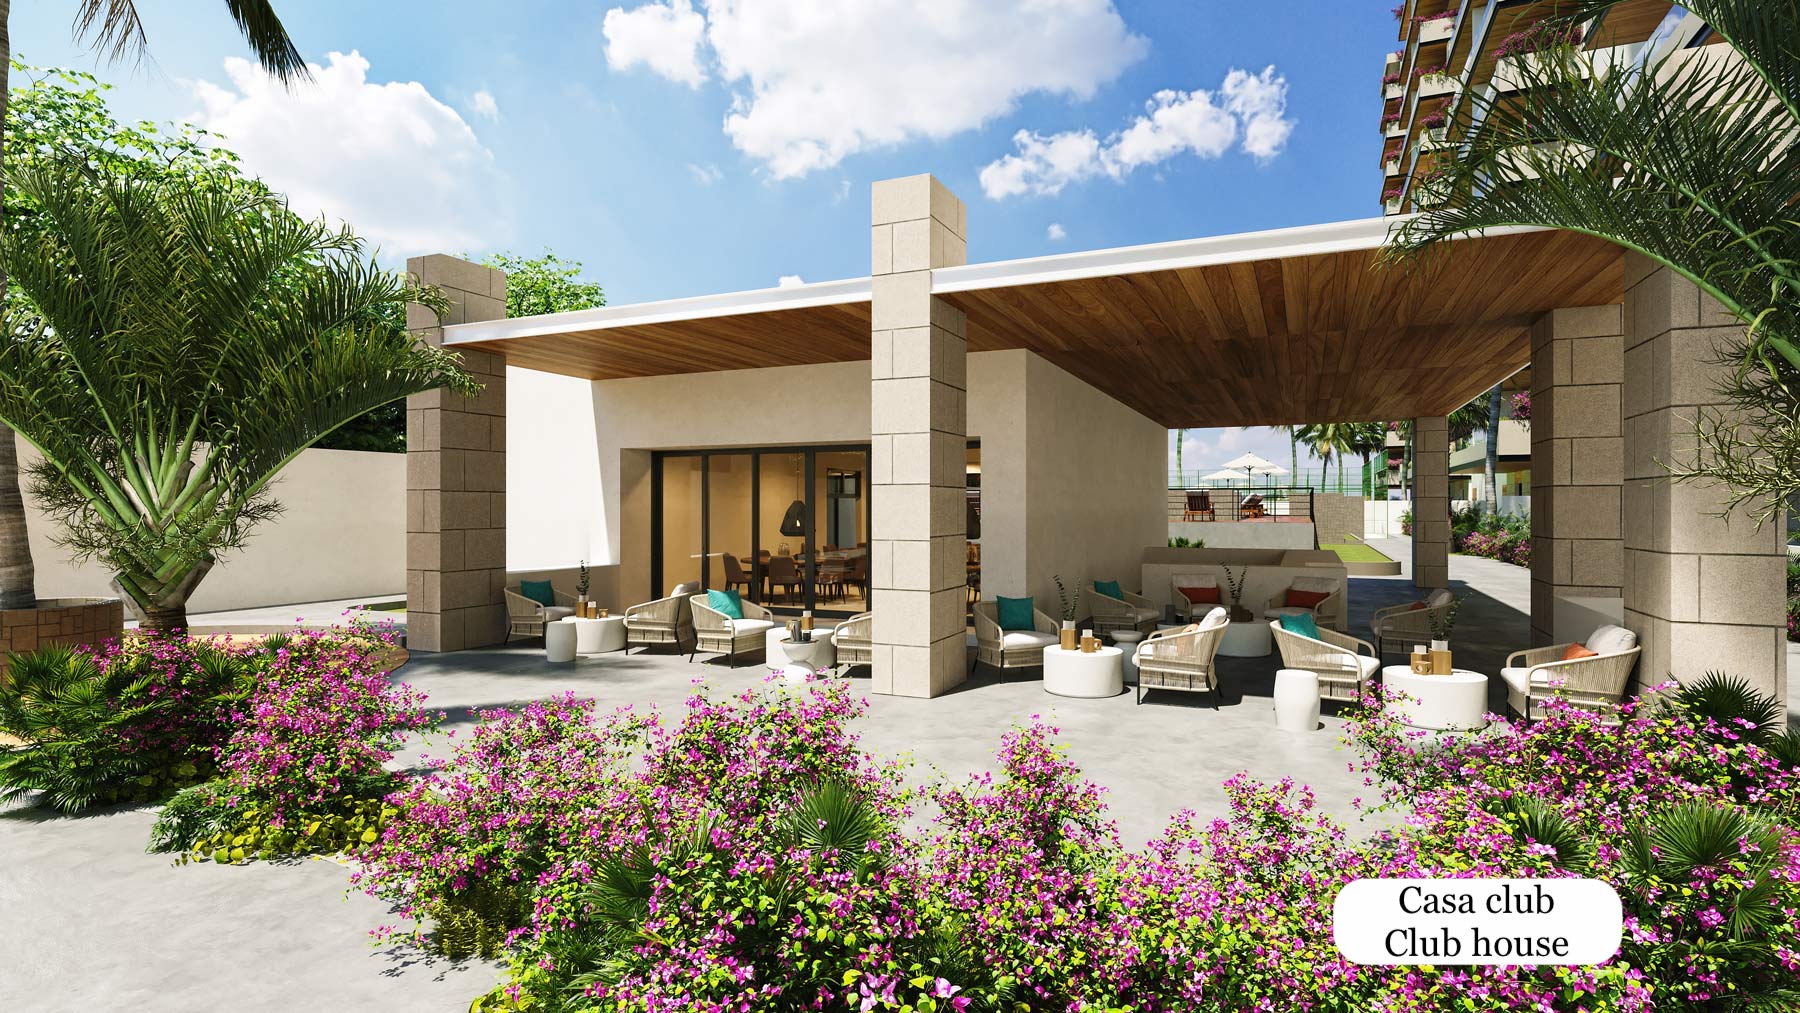 Luxury condominium, with resort-style amenities, for sale Cancun.